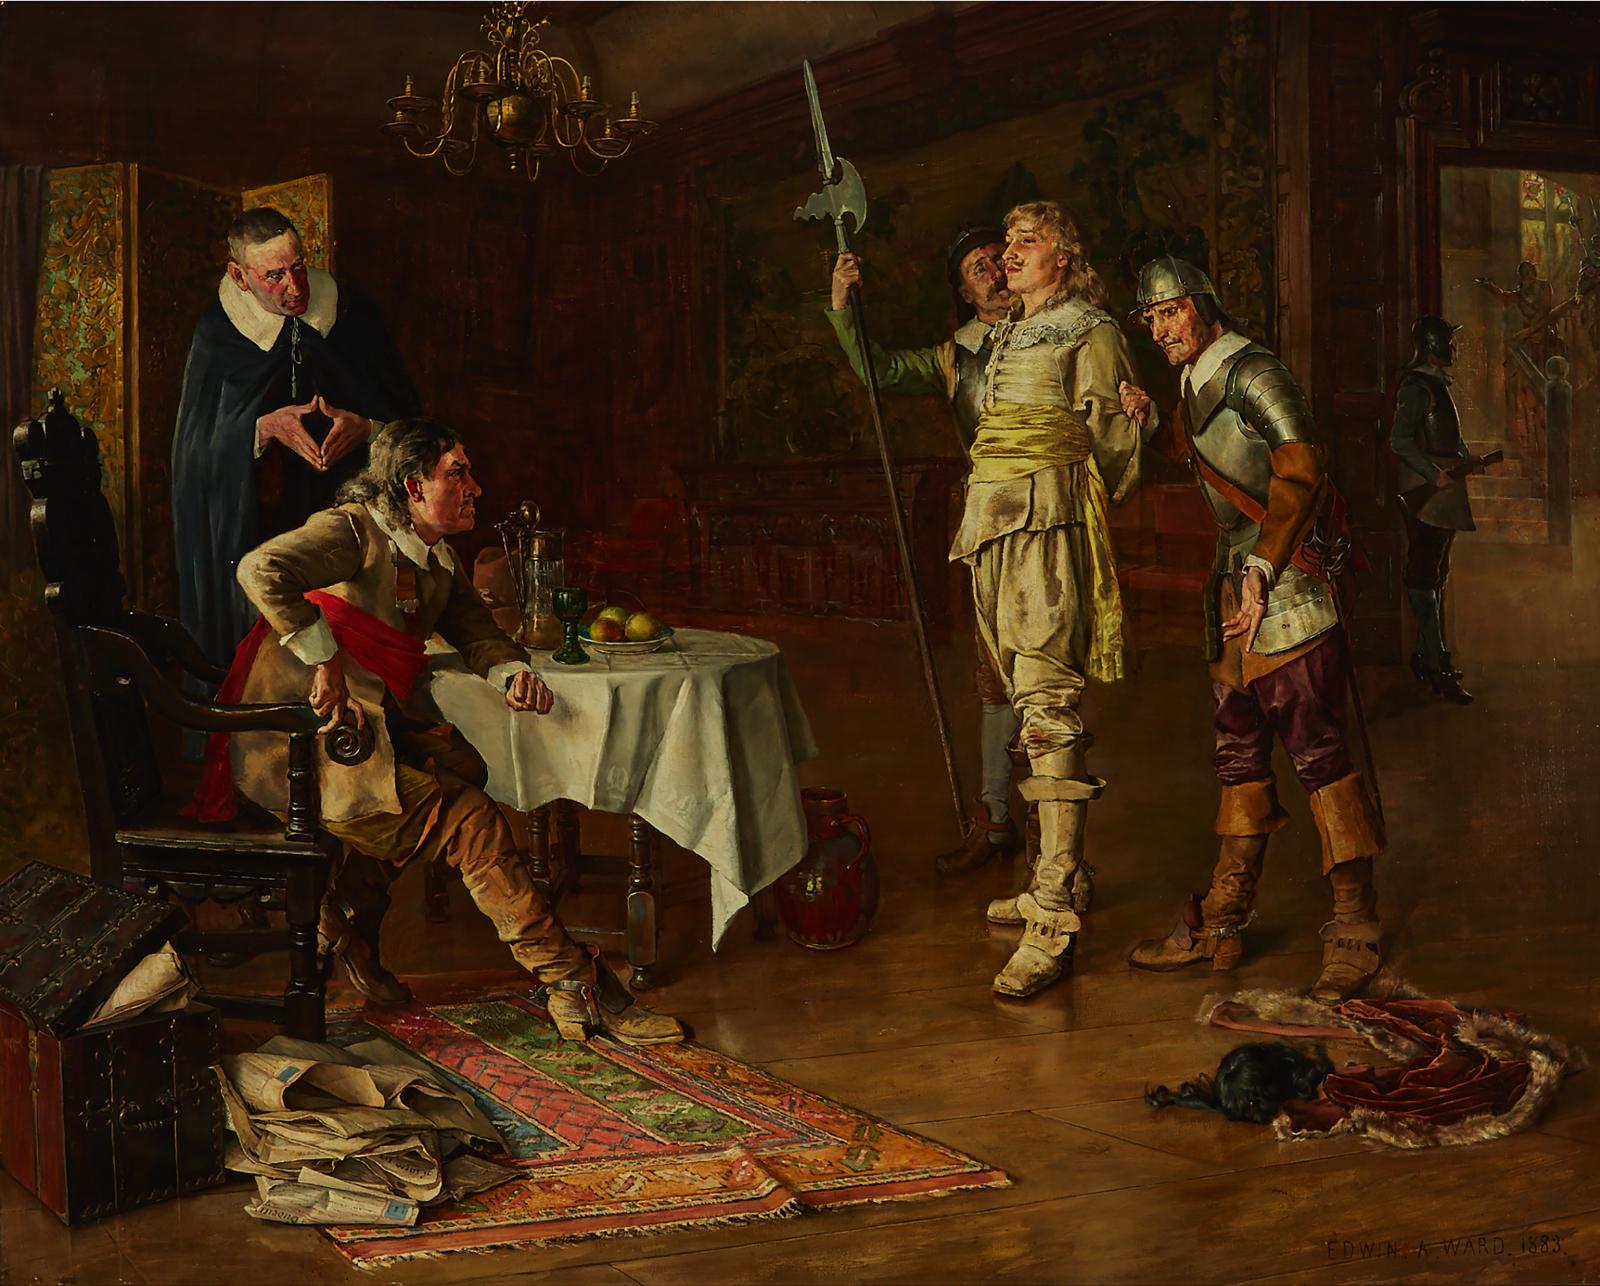 Edwin Arthur Ward (1859-1933) - Baffled (Charles I And Oliver Cromwell Discussing Important News), 1883